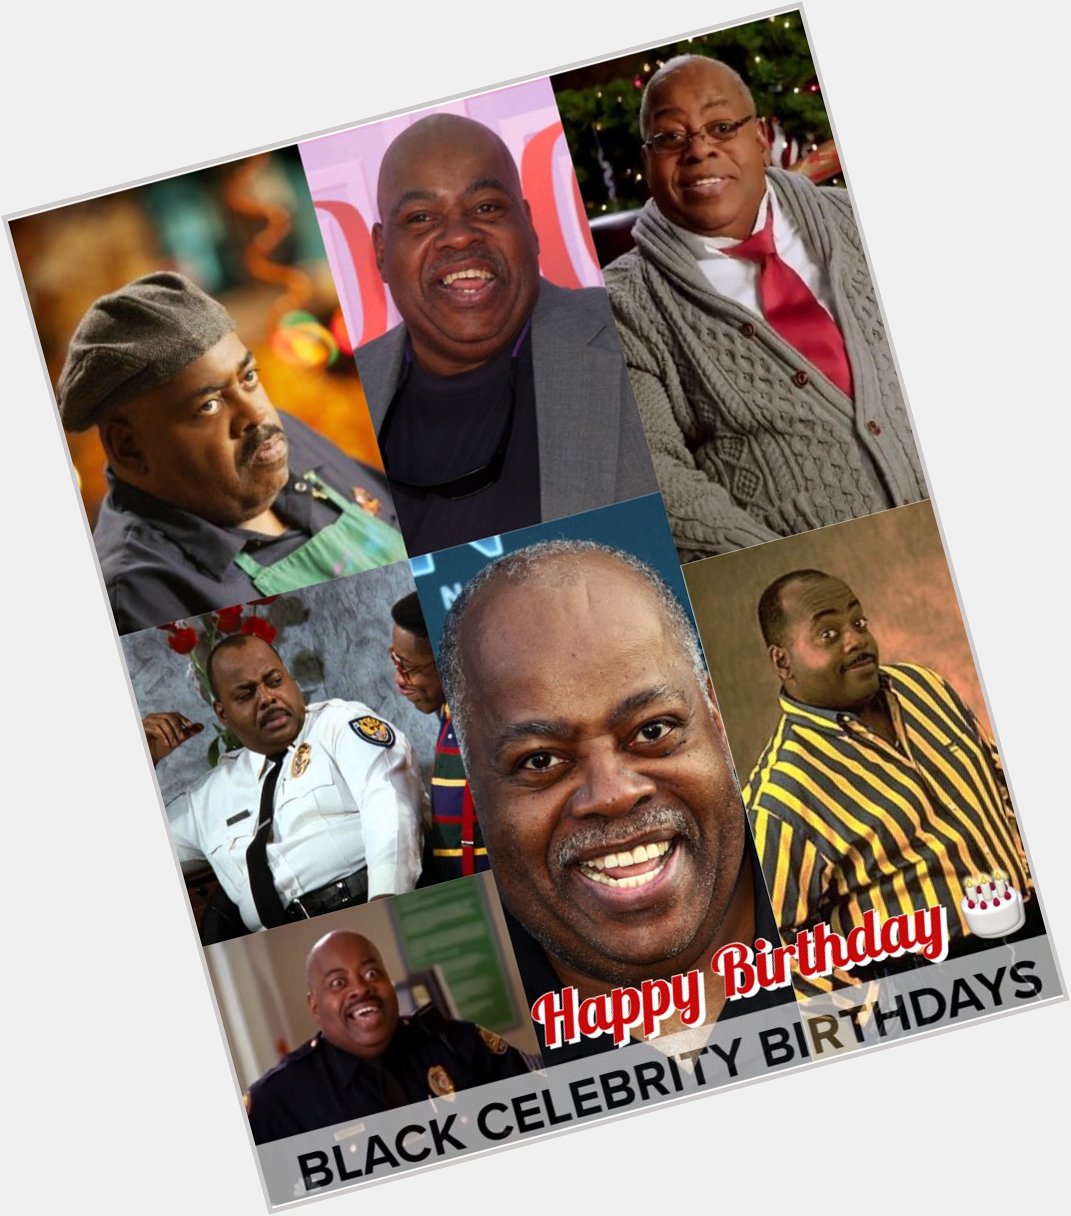 Happy Birthday To Reginald VelJohnson From Die Hard and Family Matters    